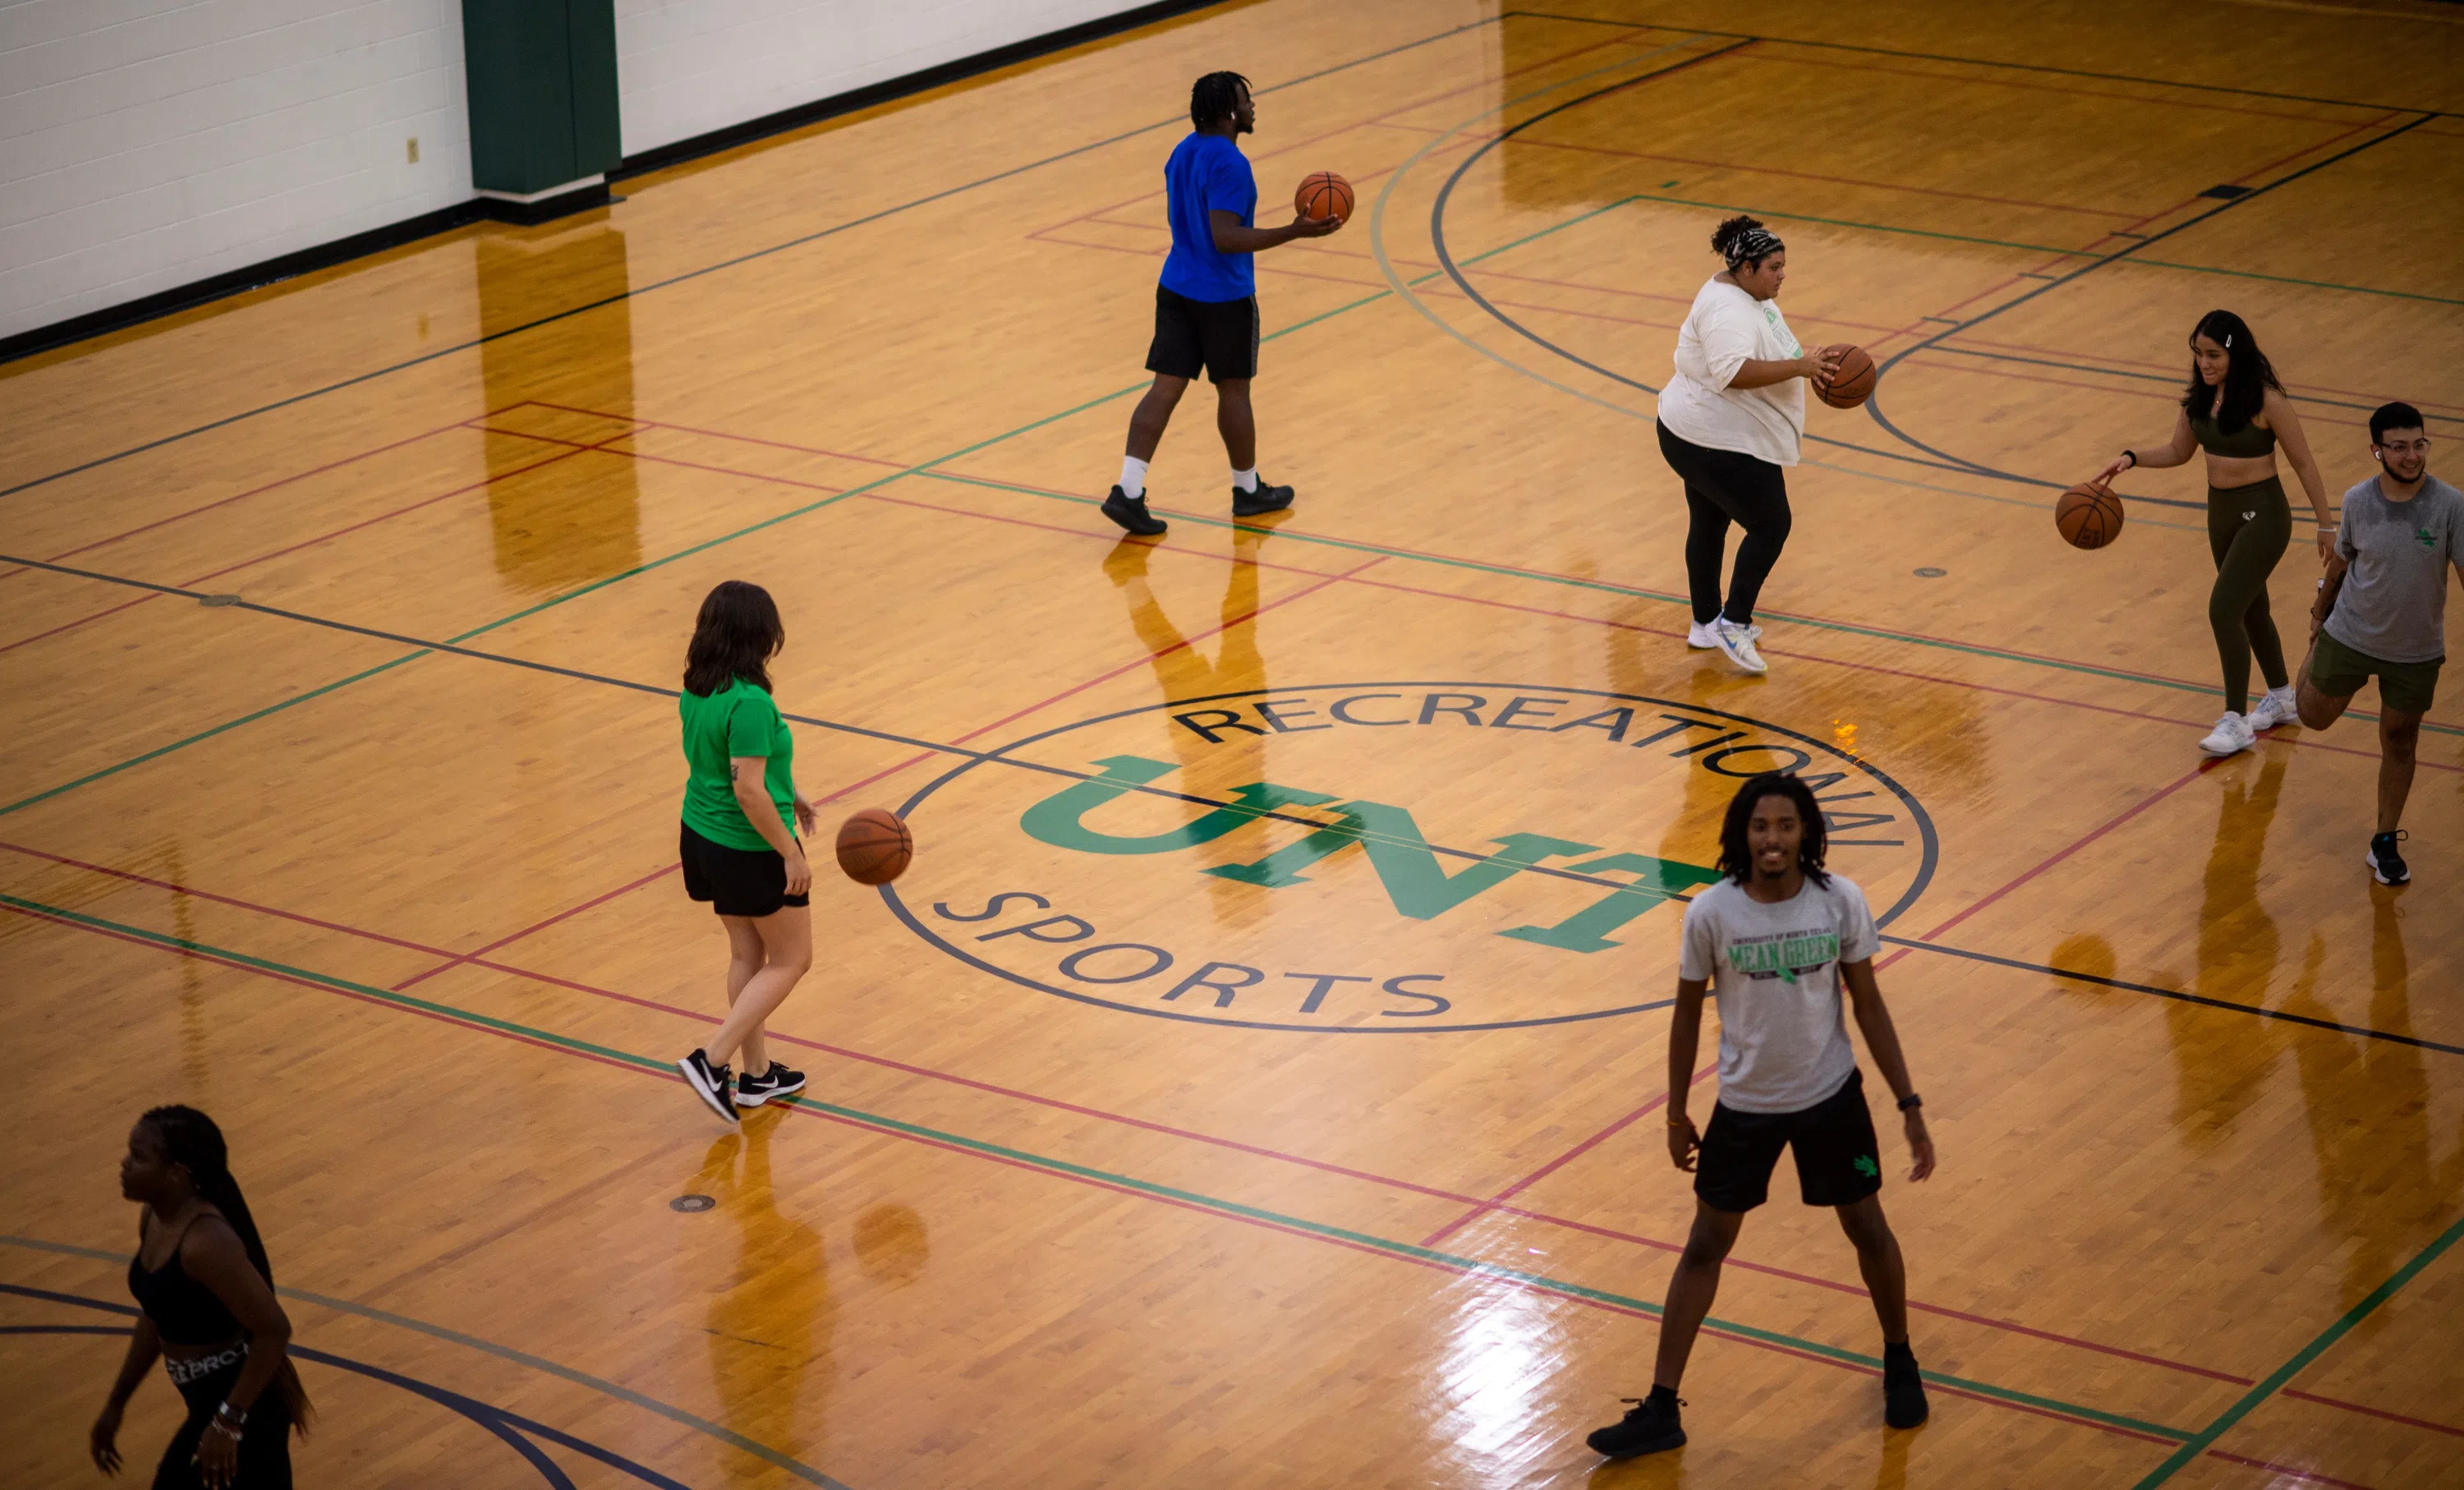 Students play with their own basketballs on a basketball court. 'UNT' is printed on the center of the court's floor. 